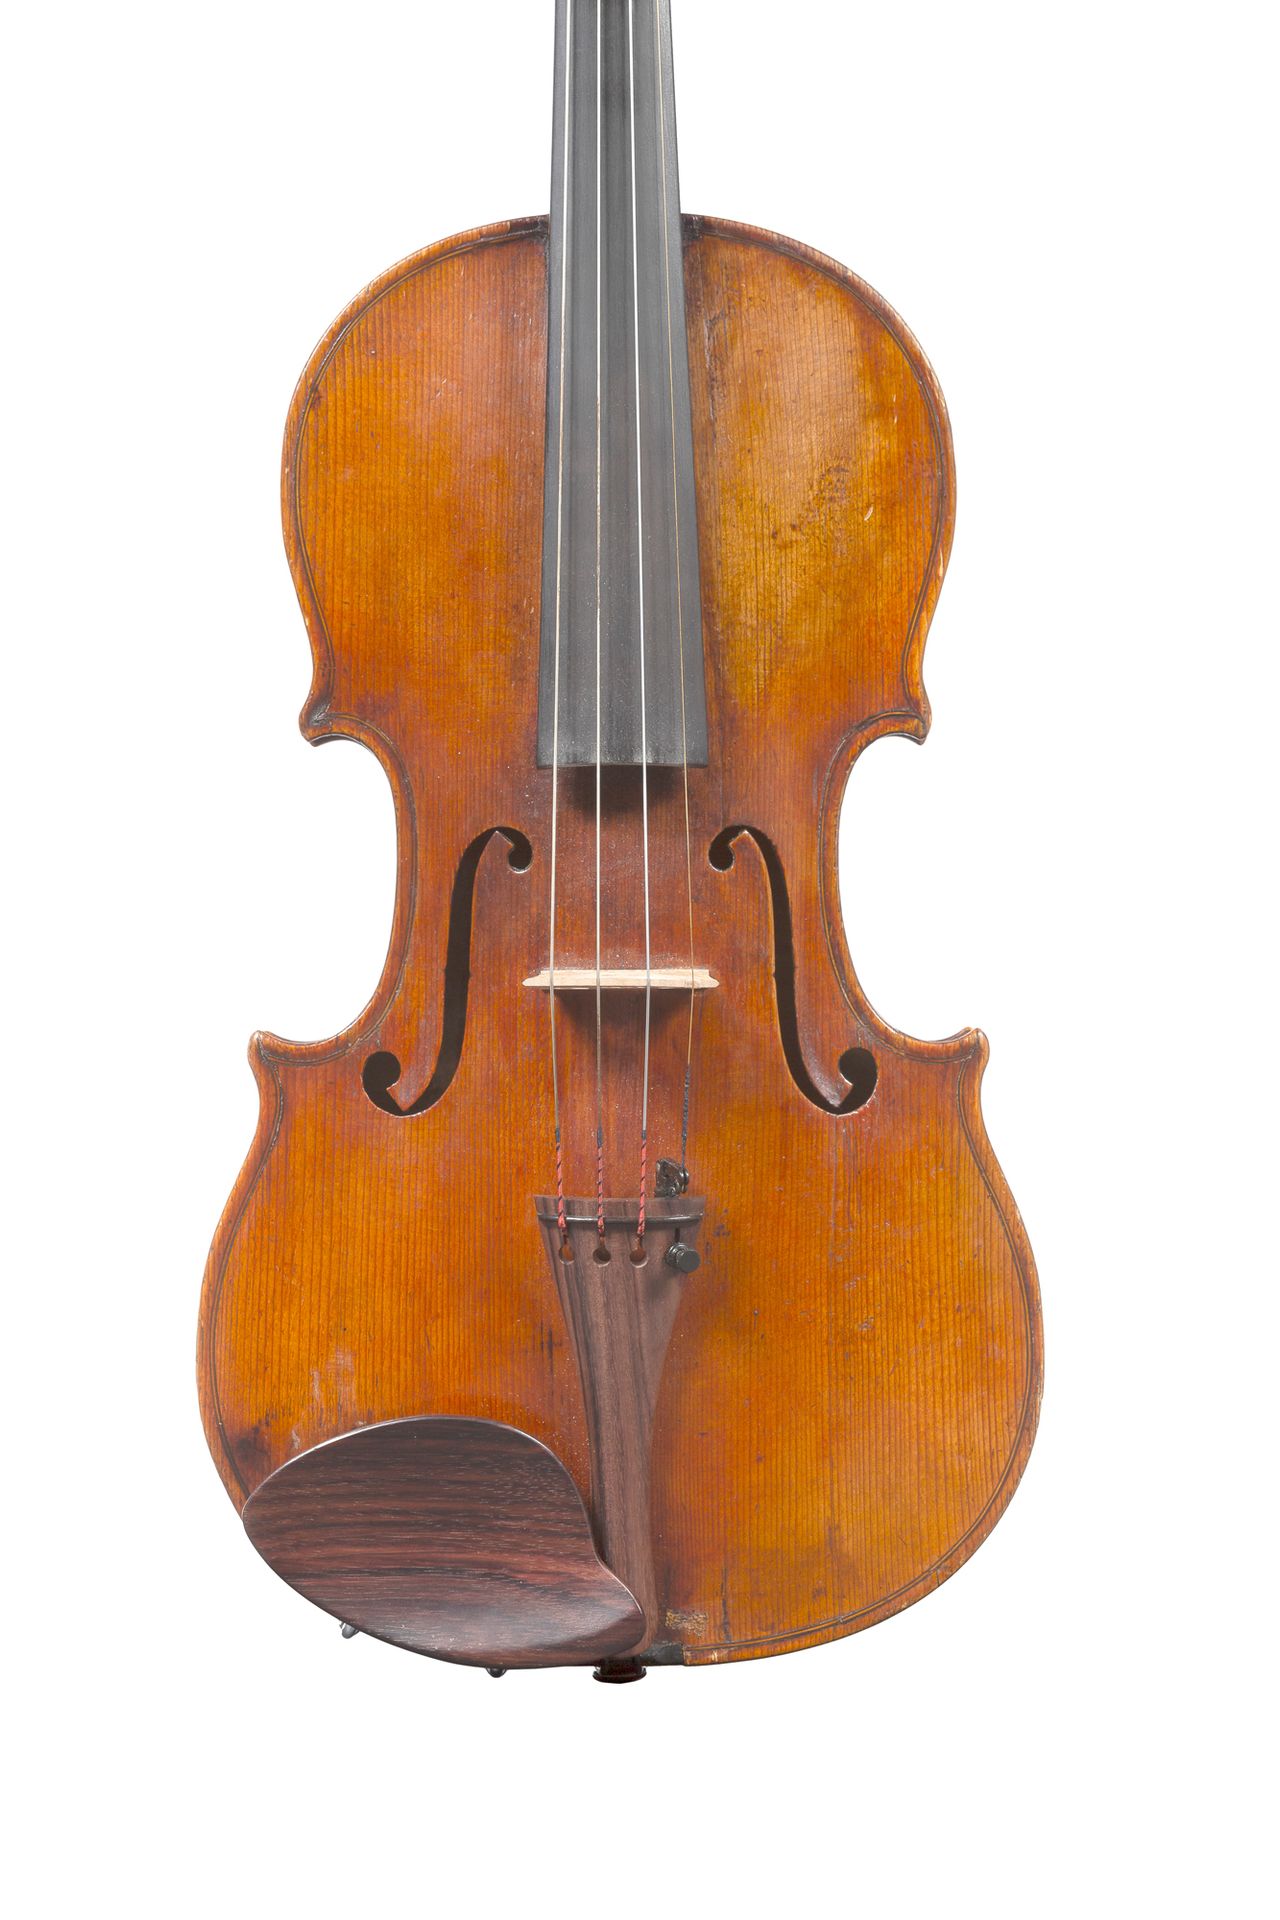 Null A French Violin, late 18th to early 19th century